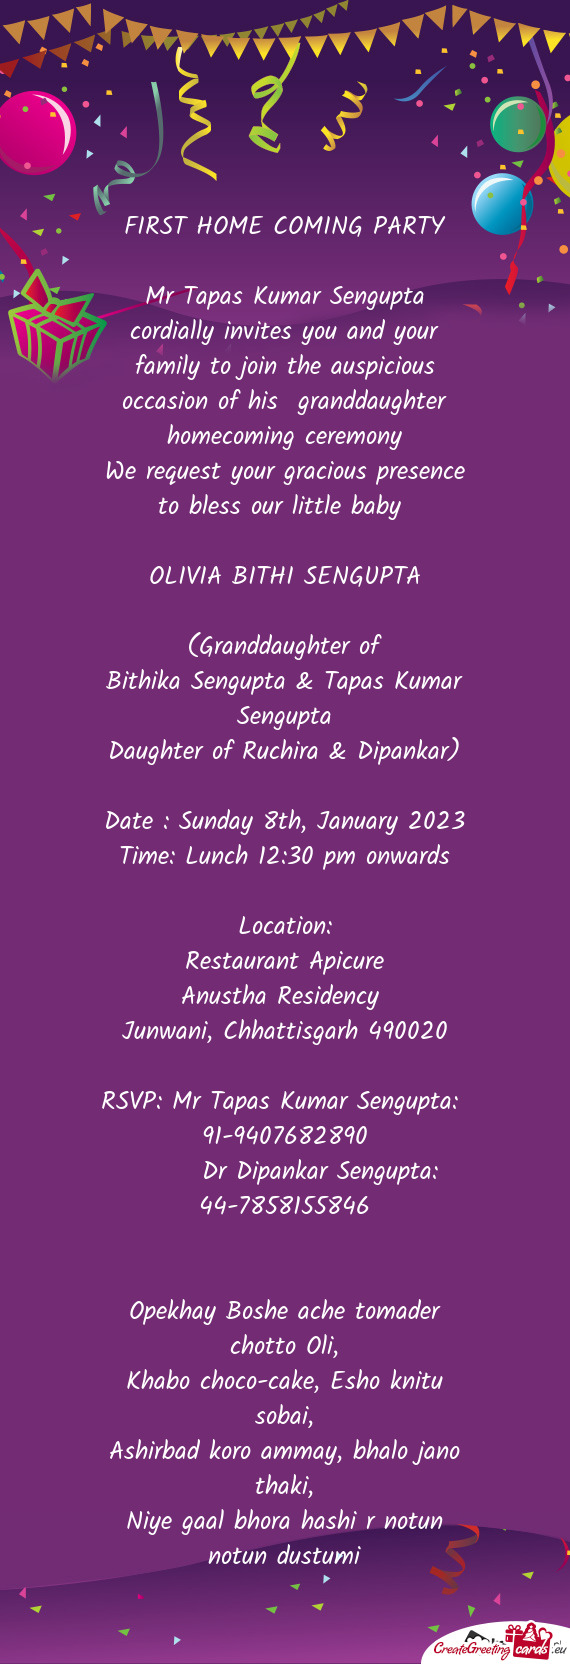 Mr Tapas Kumar Sengupta cordially invites you and your family to join the auspicious occasion of his